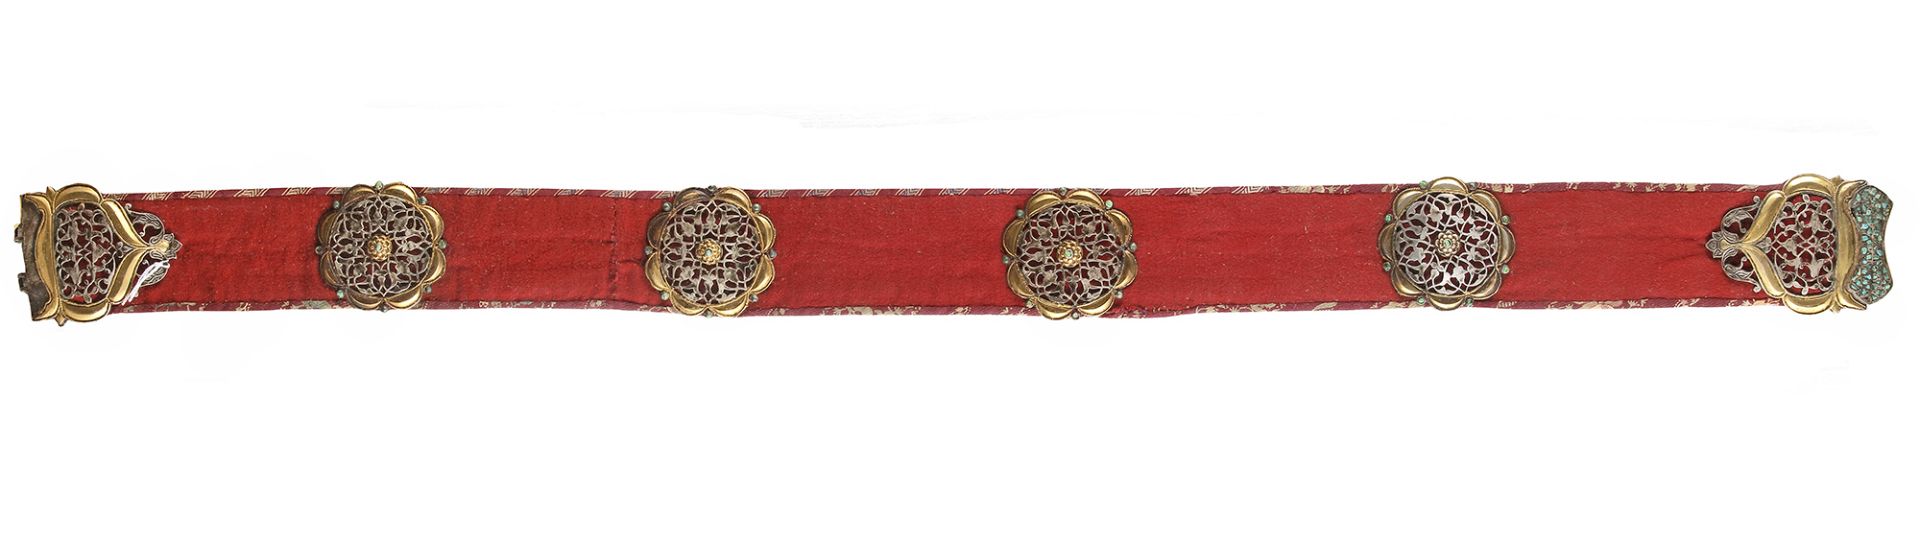 A BOKHARA TURQUOISE-INLAID SILVER-GILT MOUNTED BELT, CENTRAL ASIA, LATE 19TH CENTURY - Image 2 of 2